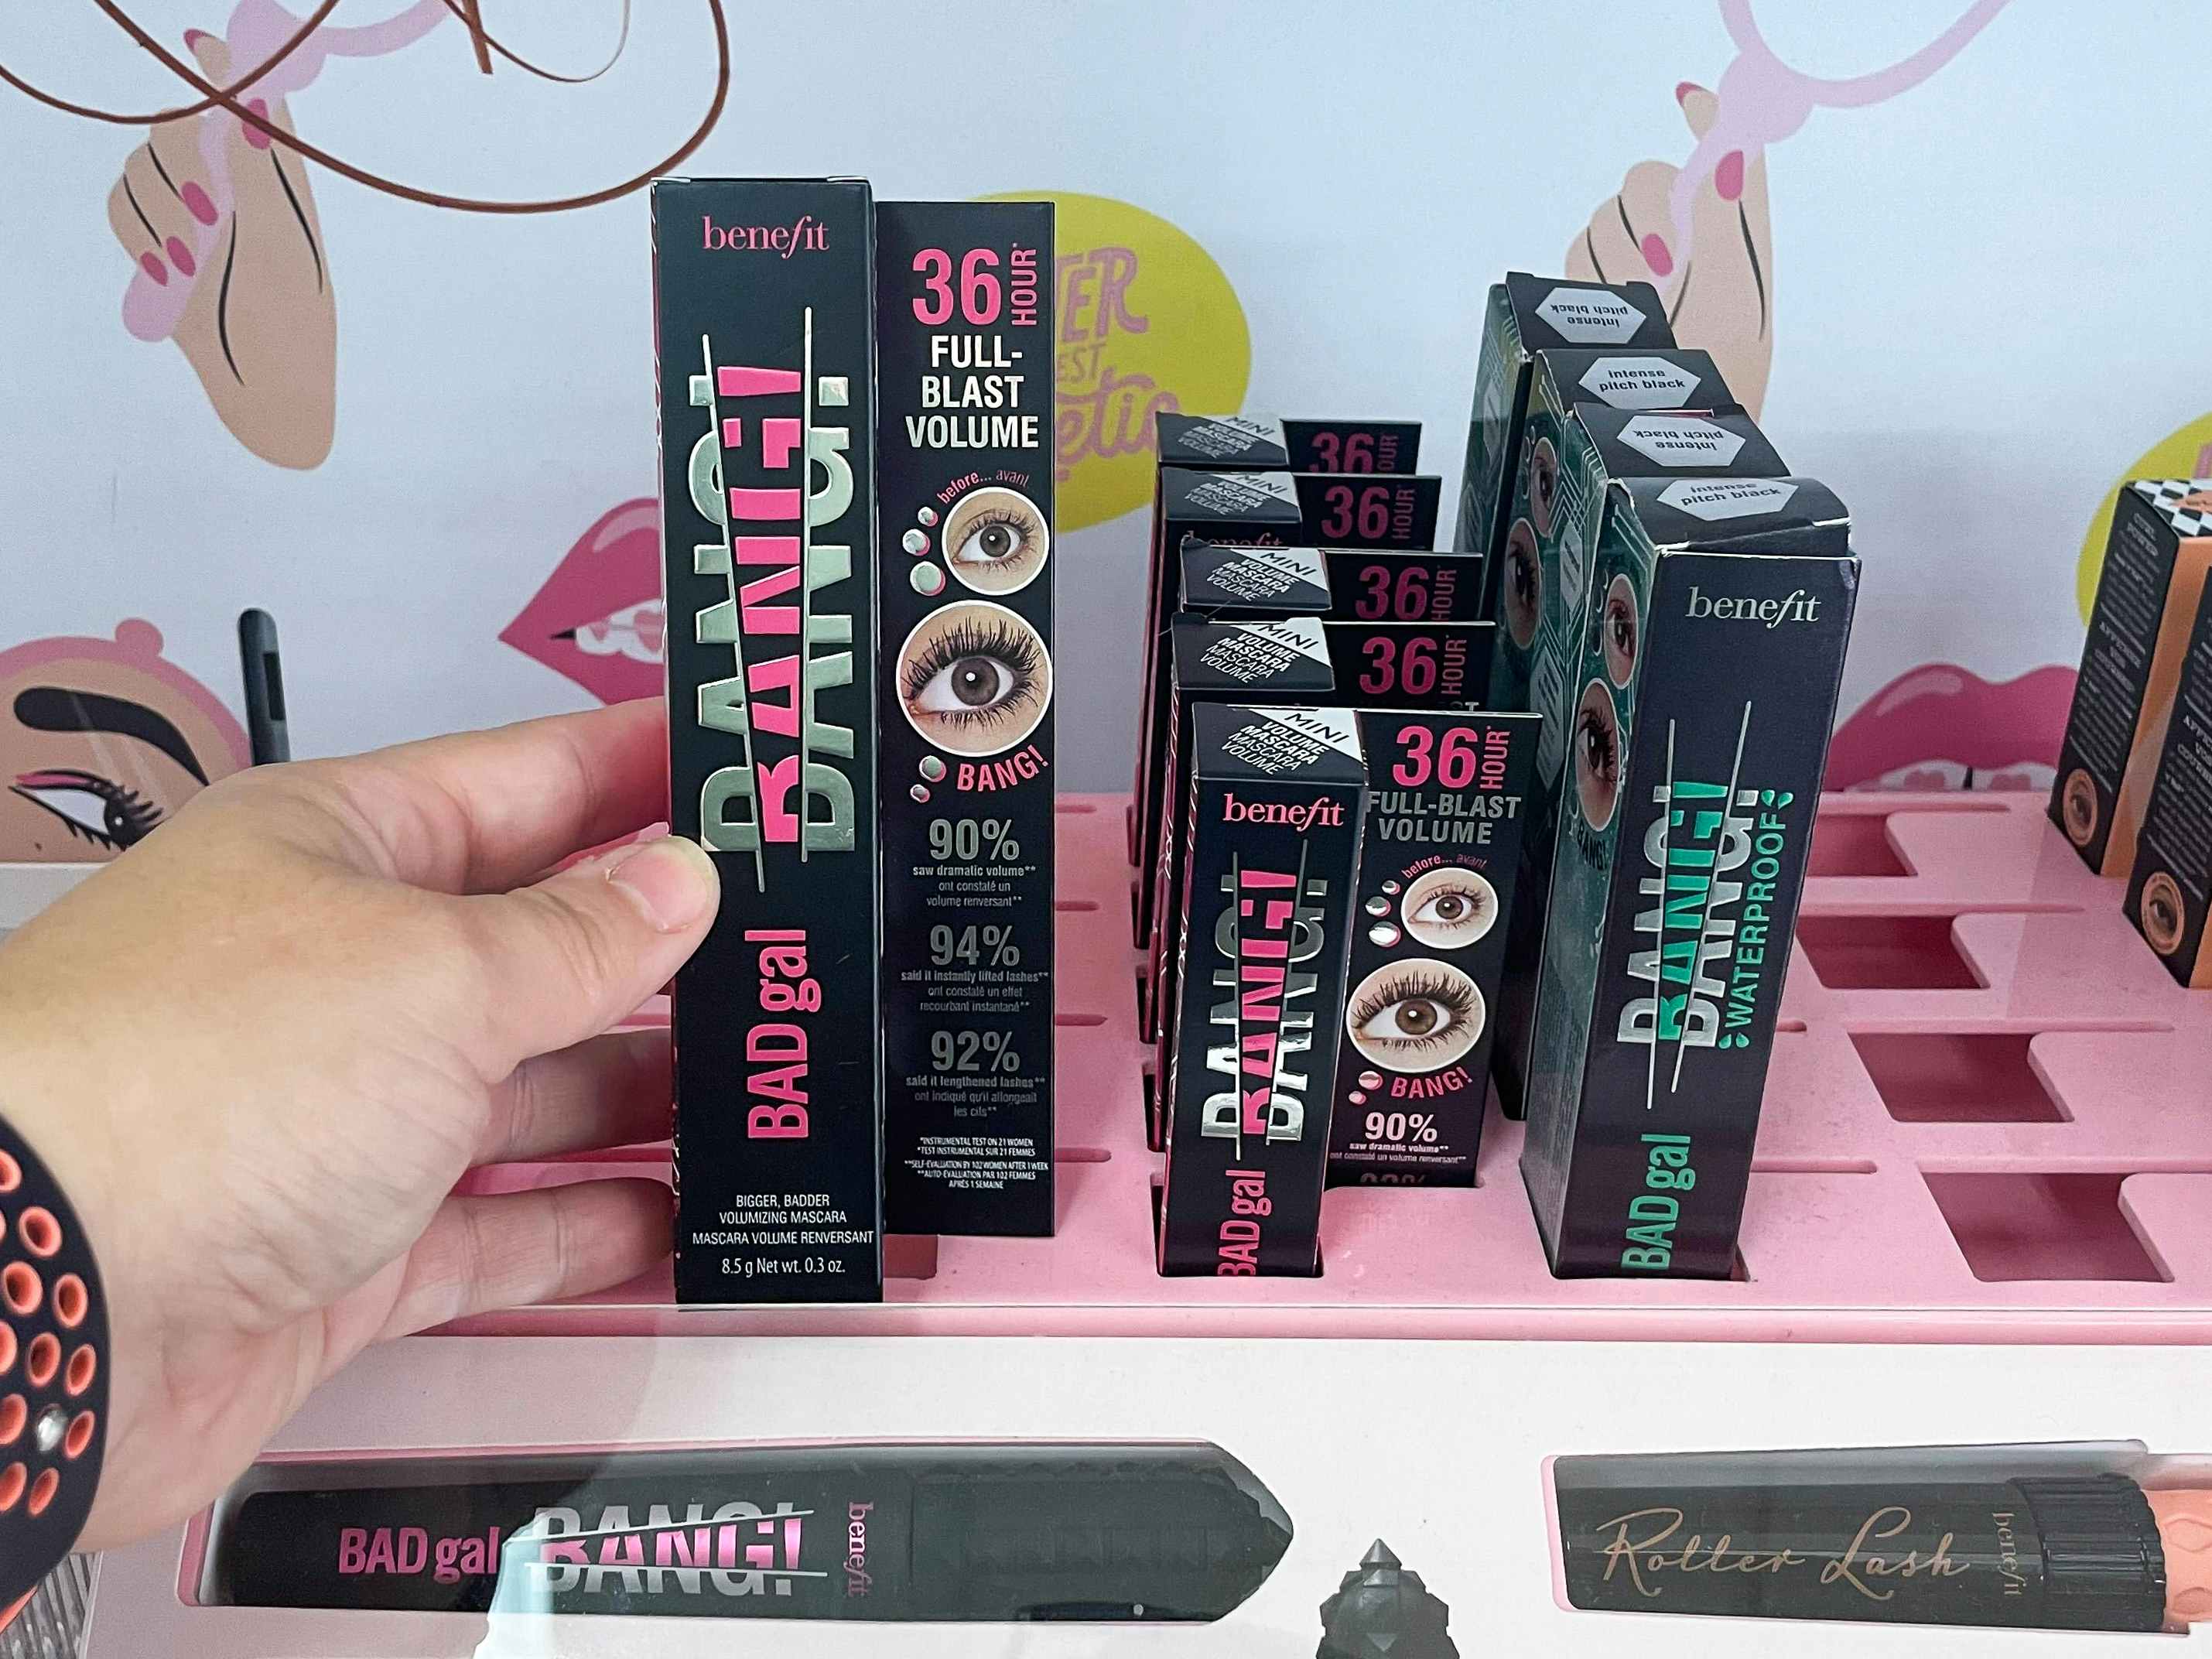 A person's hand reaching to take a Benefit Cosmetics BADgal BANG! Volumizing Mascara from the shelf in Target.